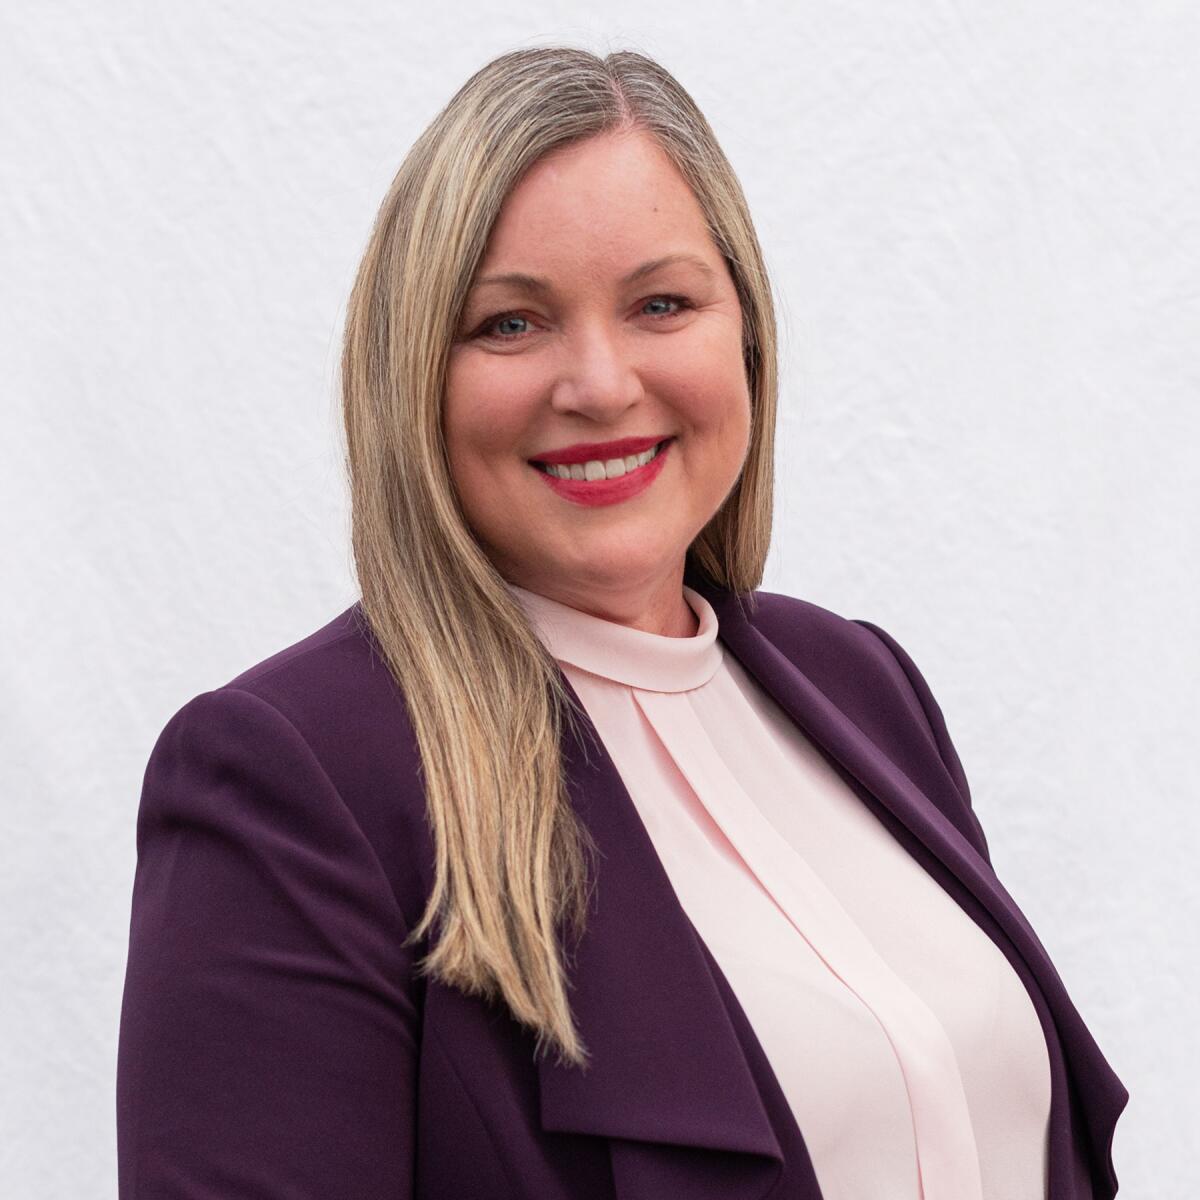 Attorney Alysson Snow is running for an open Lemon Grove City Council seat in the November 2022 election.